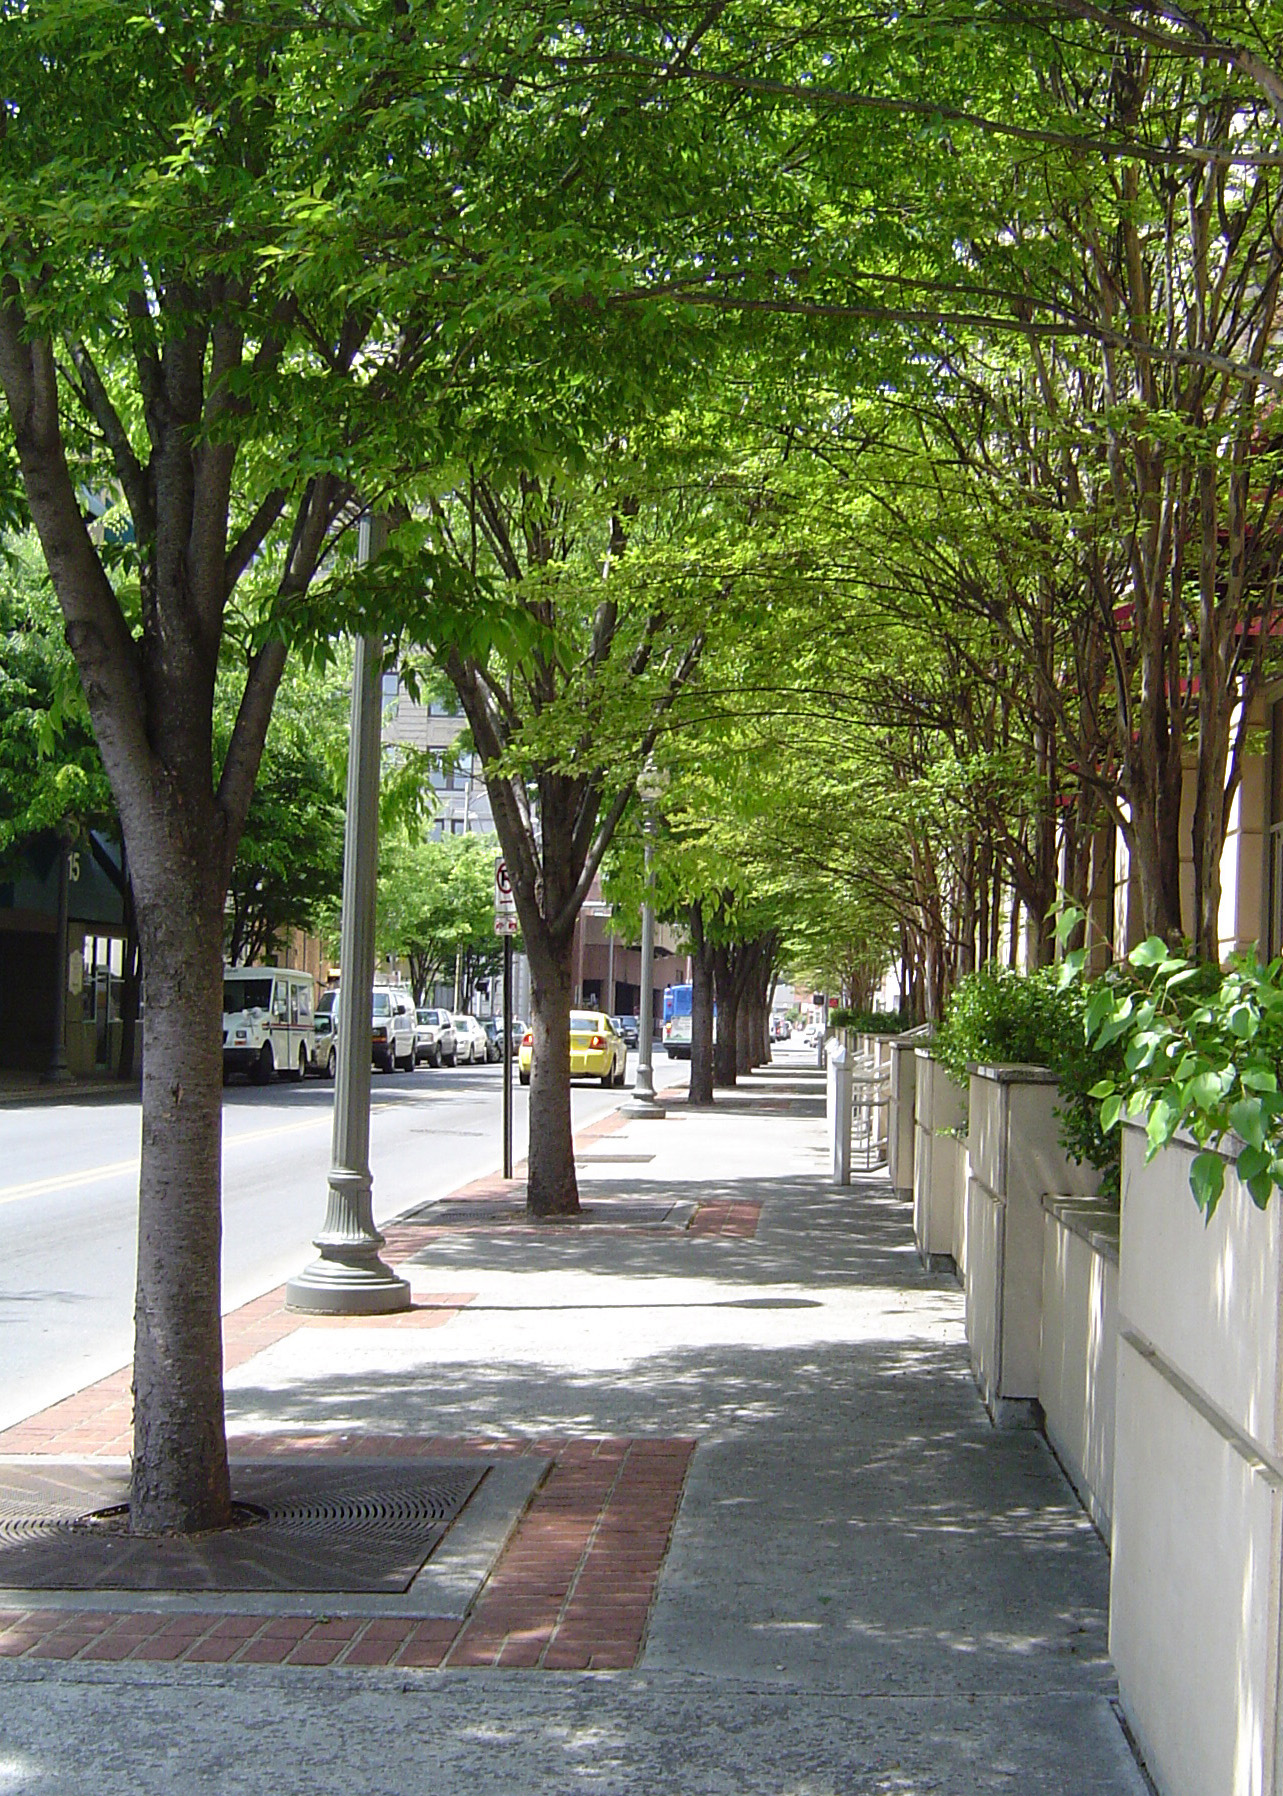 A tree-lined street in an urban area.